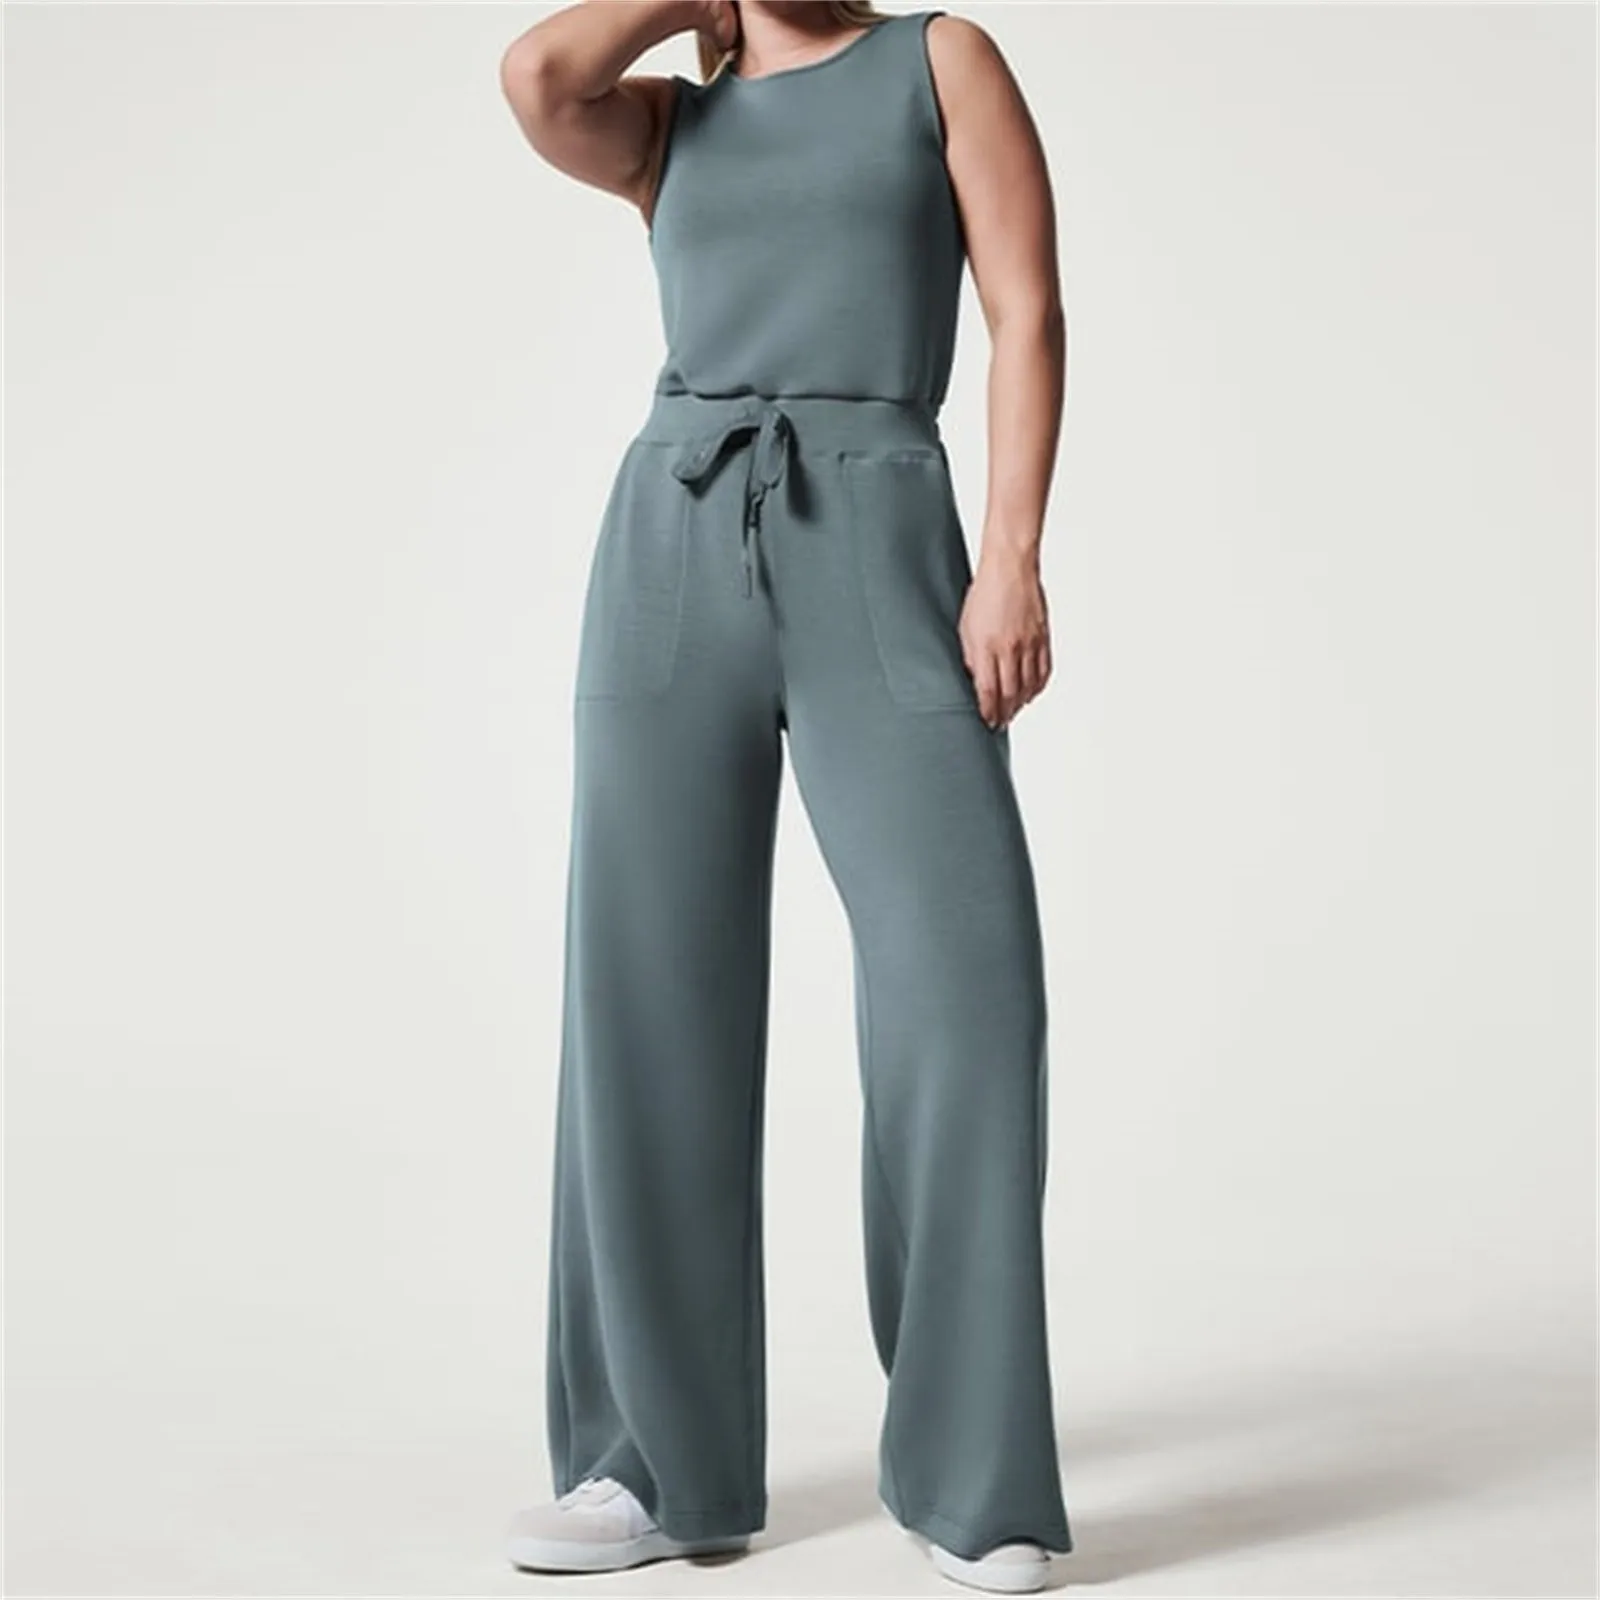 2023 New Jumpsuits for Women Casual Air Essentials Jumpsuit Ladies Summer Sleeveless Jumpsuit with Pockets Belted Wide Leg Pant polka dots print women jumpsuit suspender loose wide leg ladies playsuit sleeveless pockets high waist long rompers dungarees